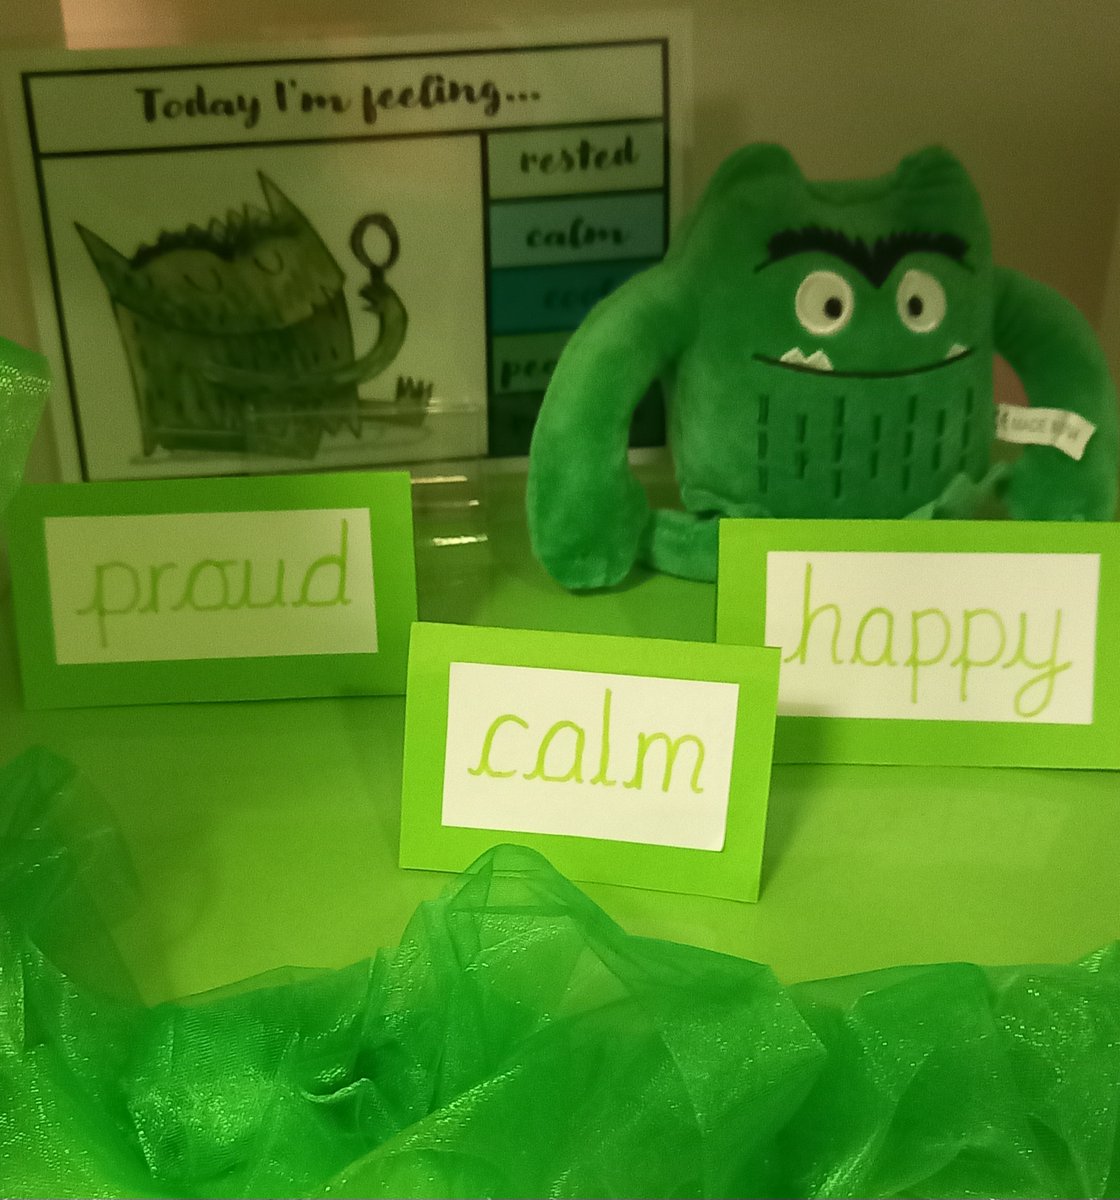 How are you feeling today? EYFS are starting our windy Wednesday morning feeling calm, happy and ready to learn. #colourmonster #yourfeelingsmatter